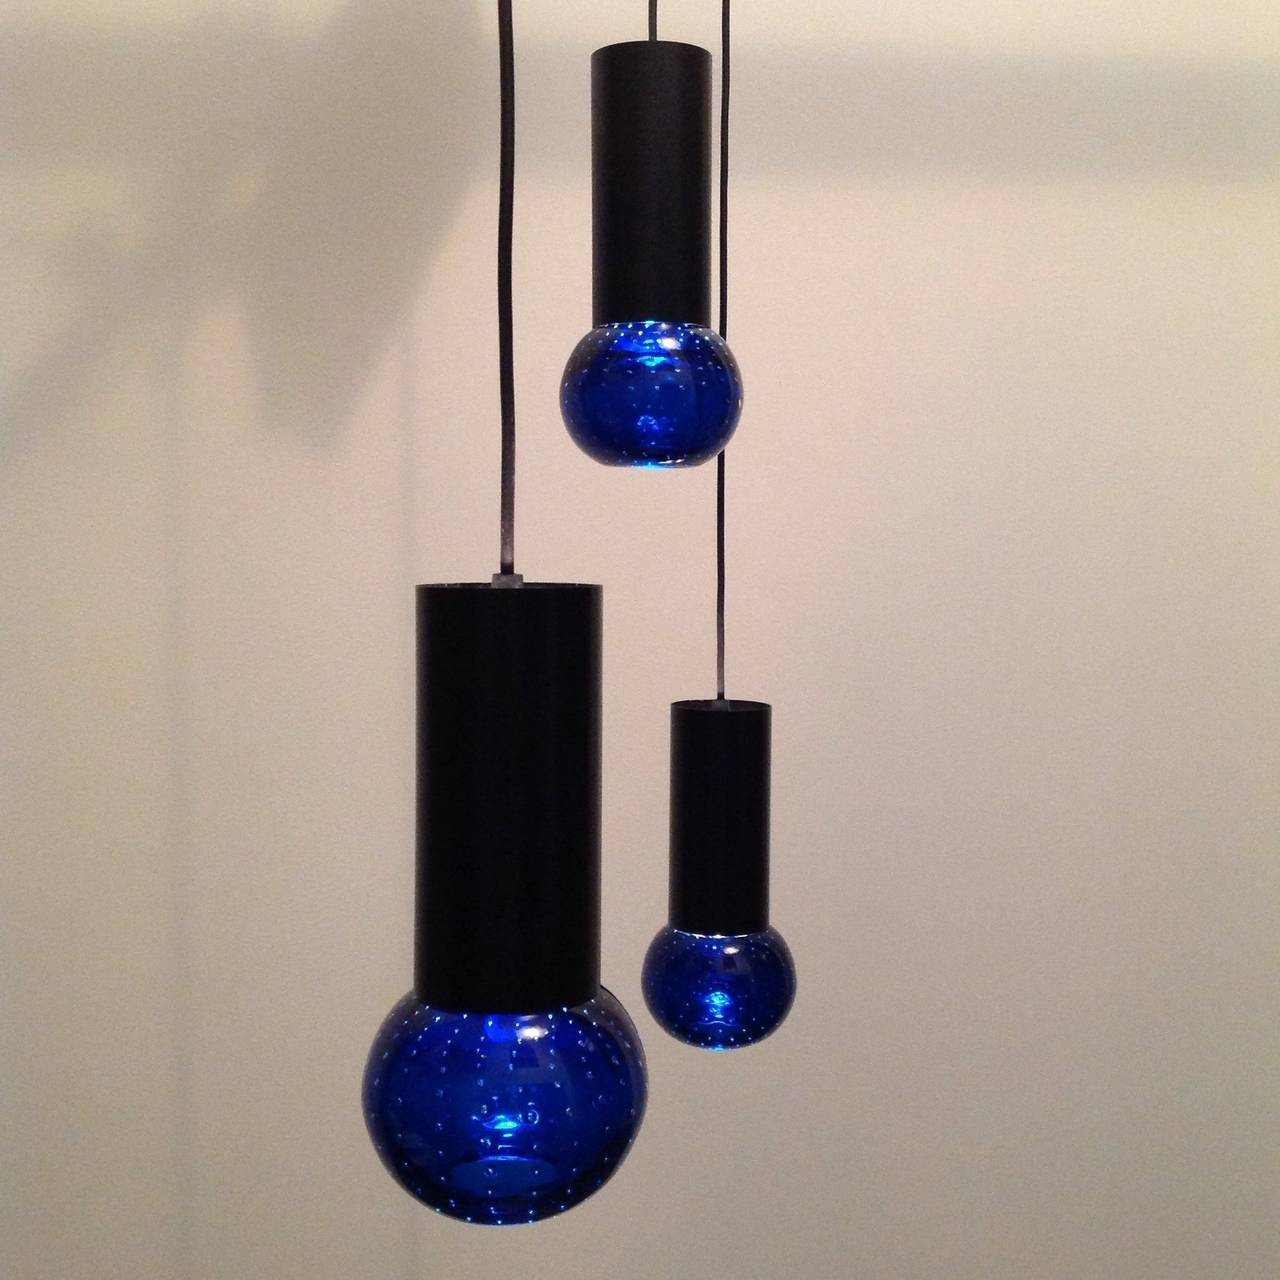 Three suspension or decoration lamps, beautiful deep blue color gives a very special light effect.
Made by Artiluce, glass part by Archimede Seguso, design Gino Sarfatti.

Pictures give a not so nice effect when lights are on, since the wattage